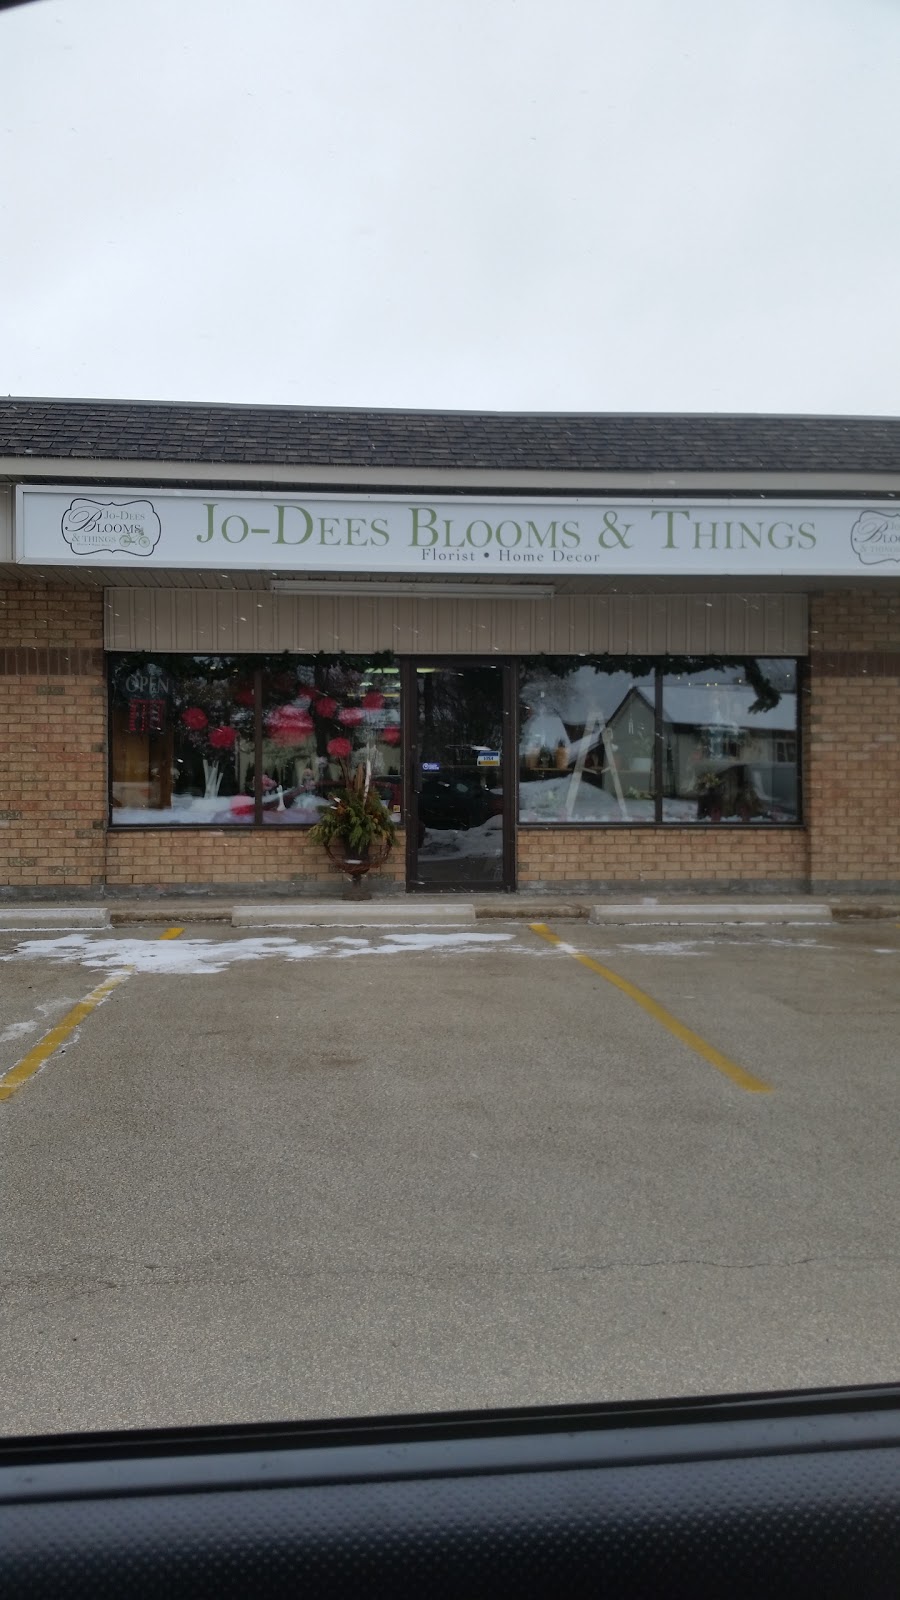 Jo-Dees Blooms & Things | florist | 195 Mill St, Angus, ON L0M 1B2, Canada | 7054246882 OR +1 705-424-6882